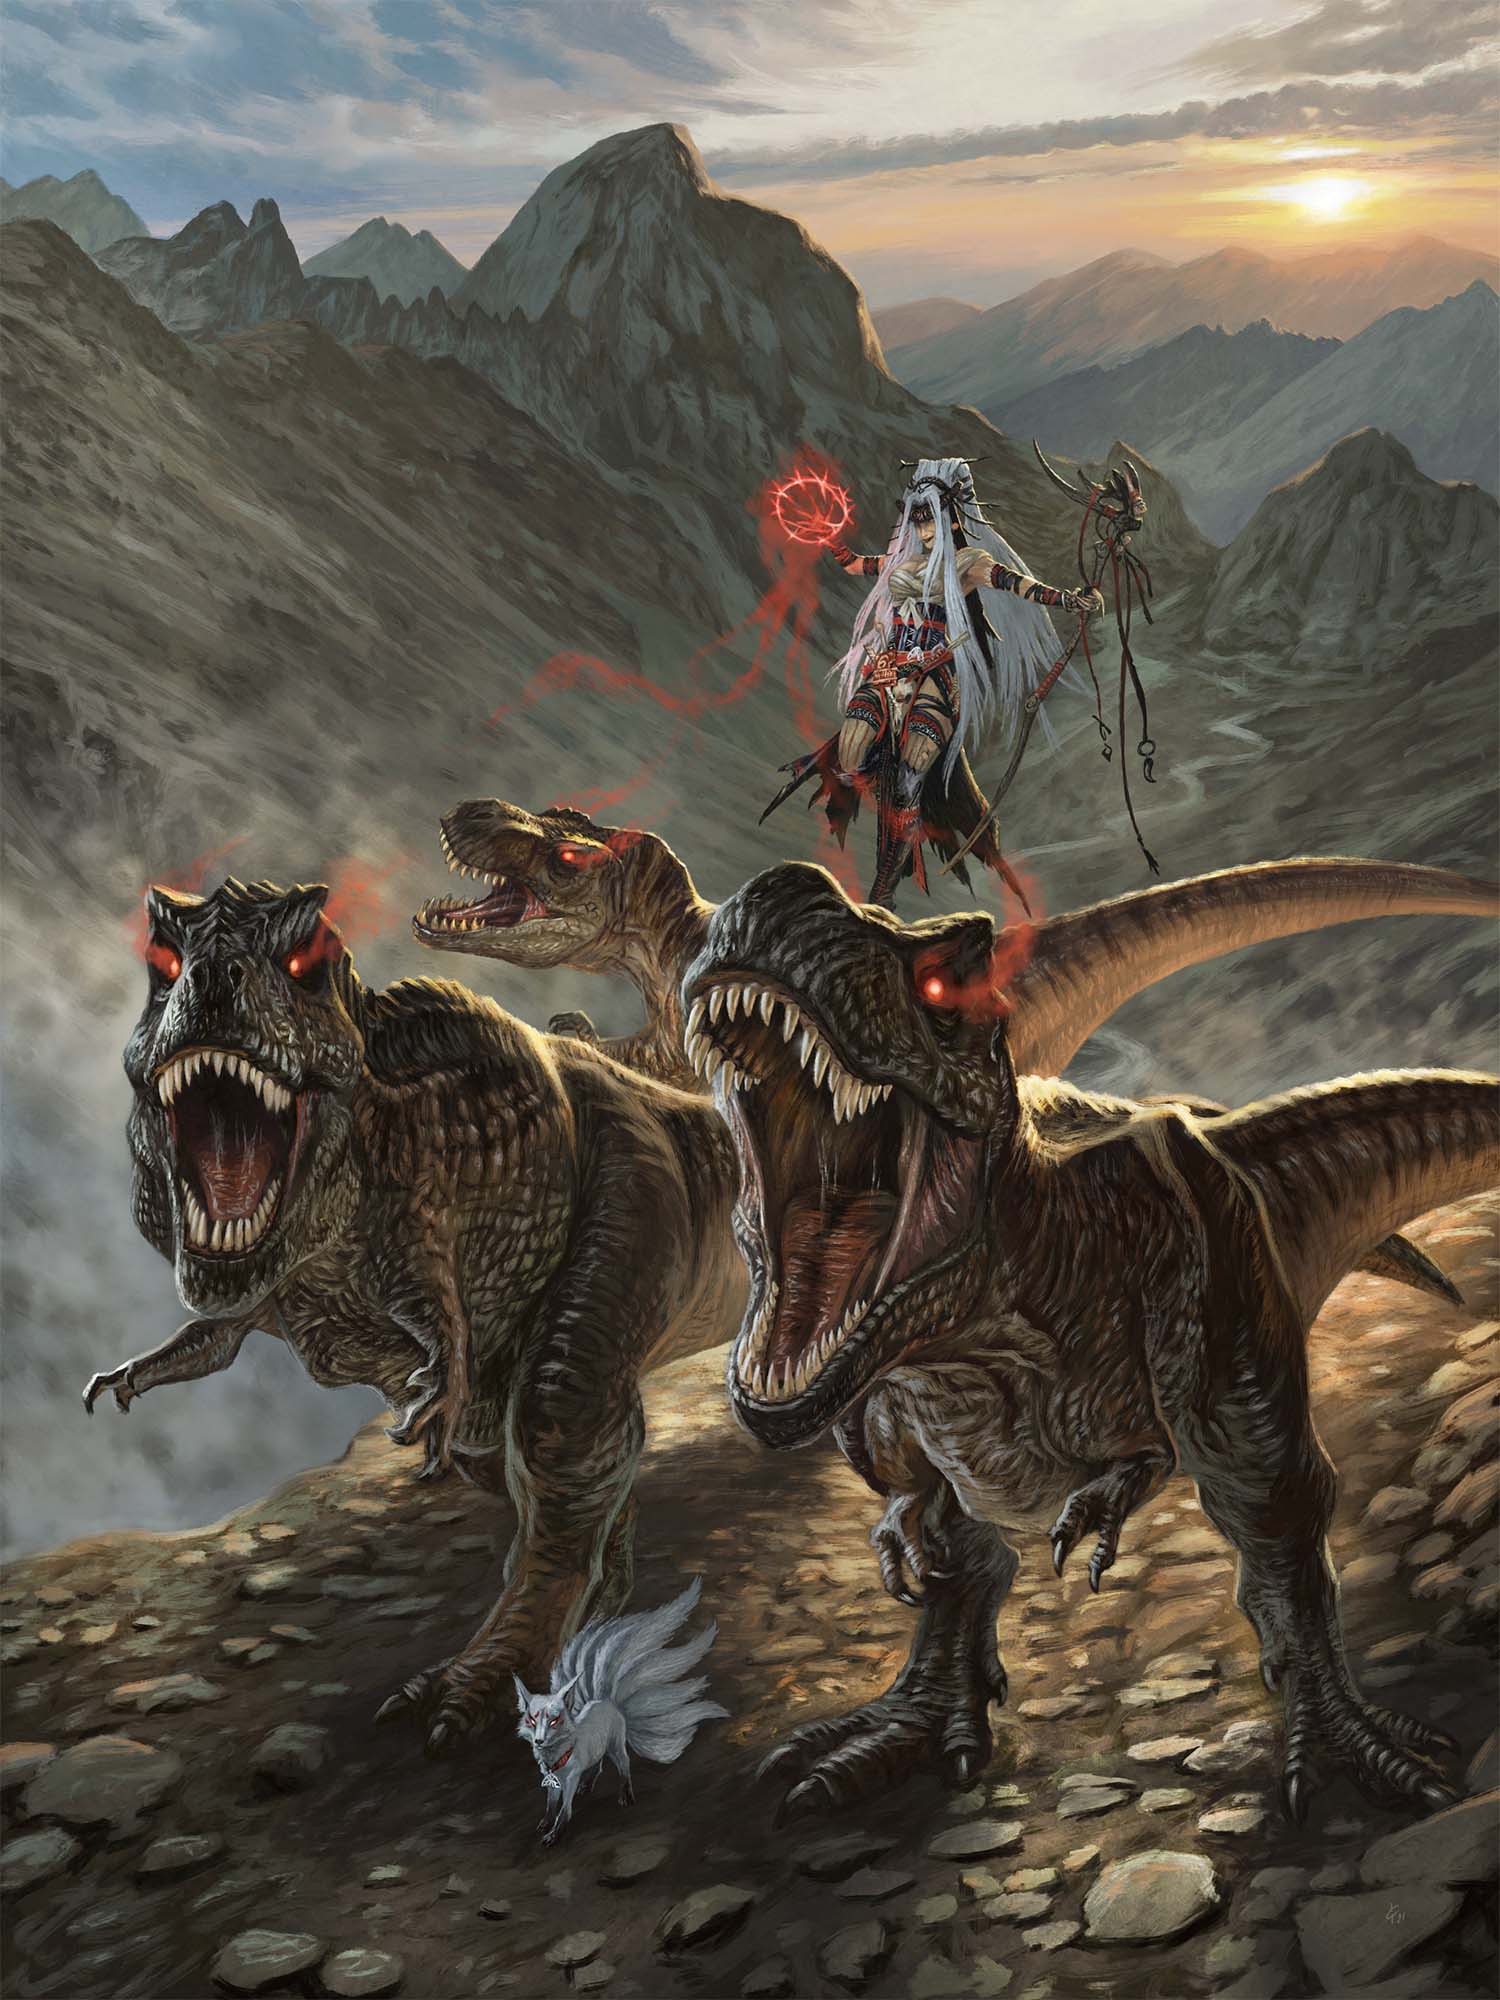 Pathfinder Iconic witch, Feiya, floats the backs of three Tyrannosaurus's that she is guiding with a red magic from her outstretched staff